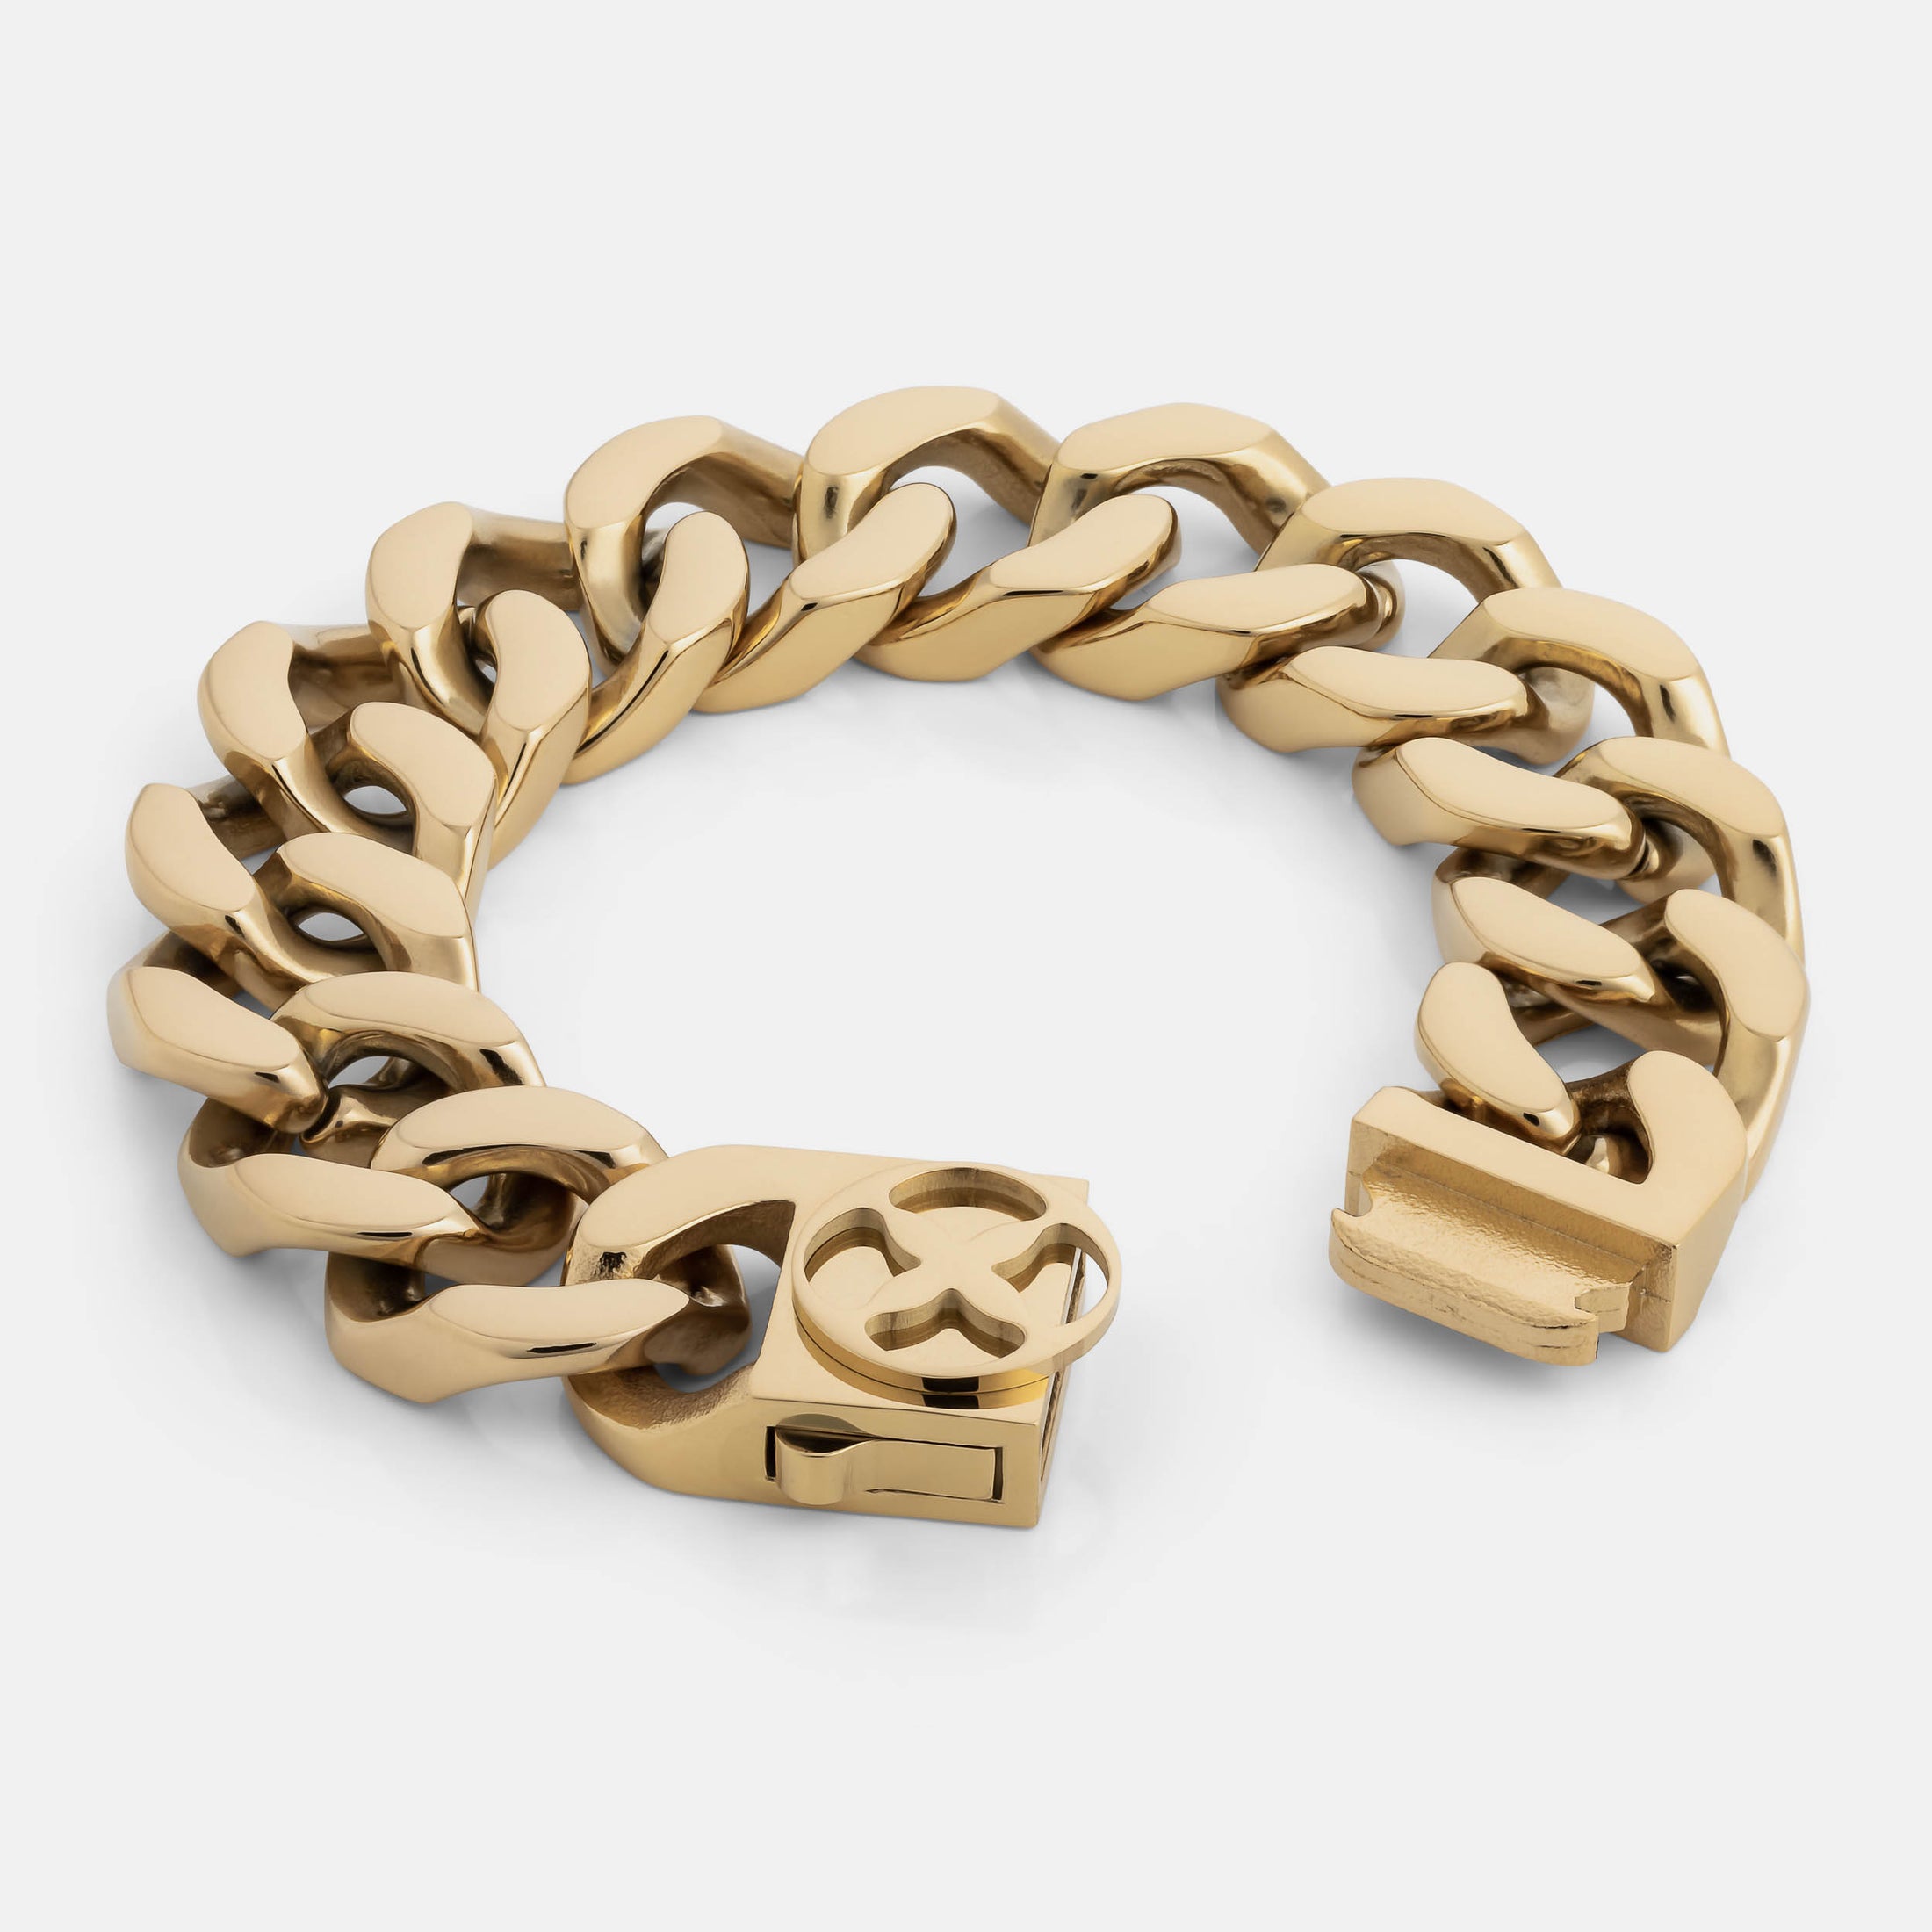 Vitaly Integer Bracelet | 100% Recycled Stainless Steel Accessories